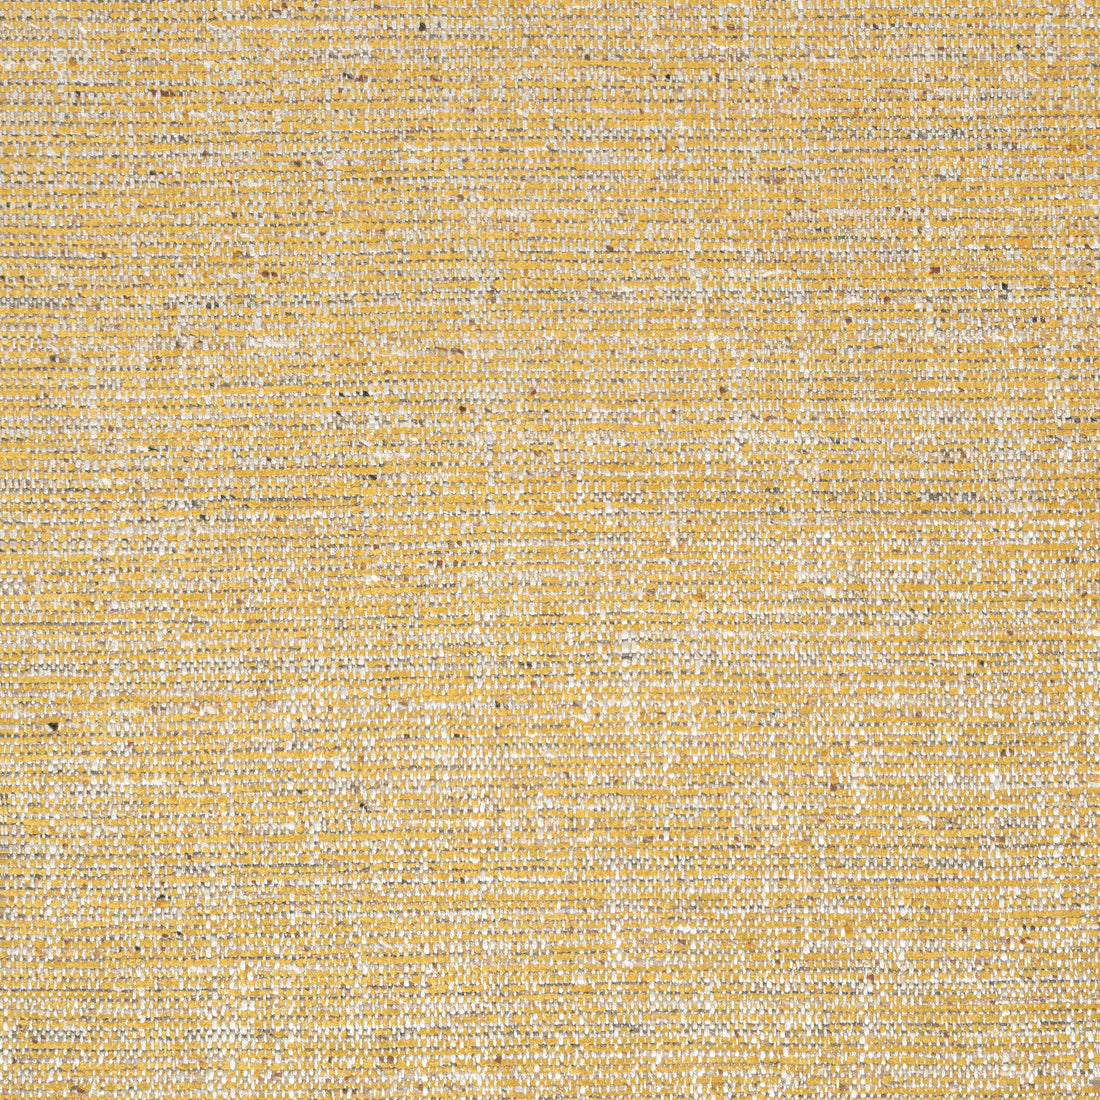 Elgin fabric in dijon color - pattern number W80943 - by Thibaut in the Dunmore collection